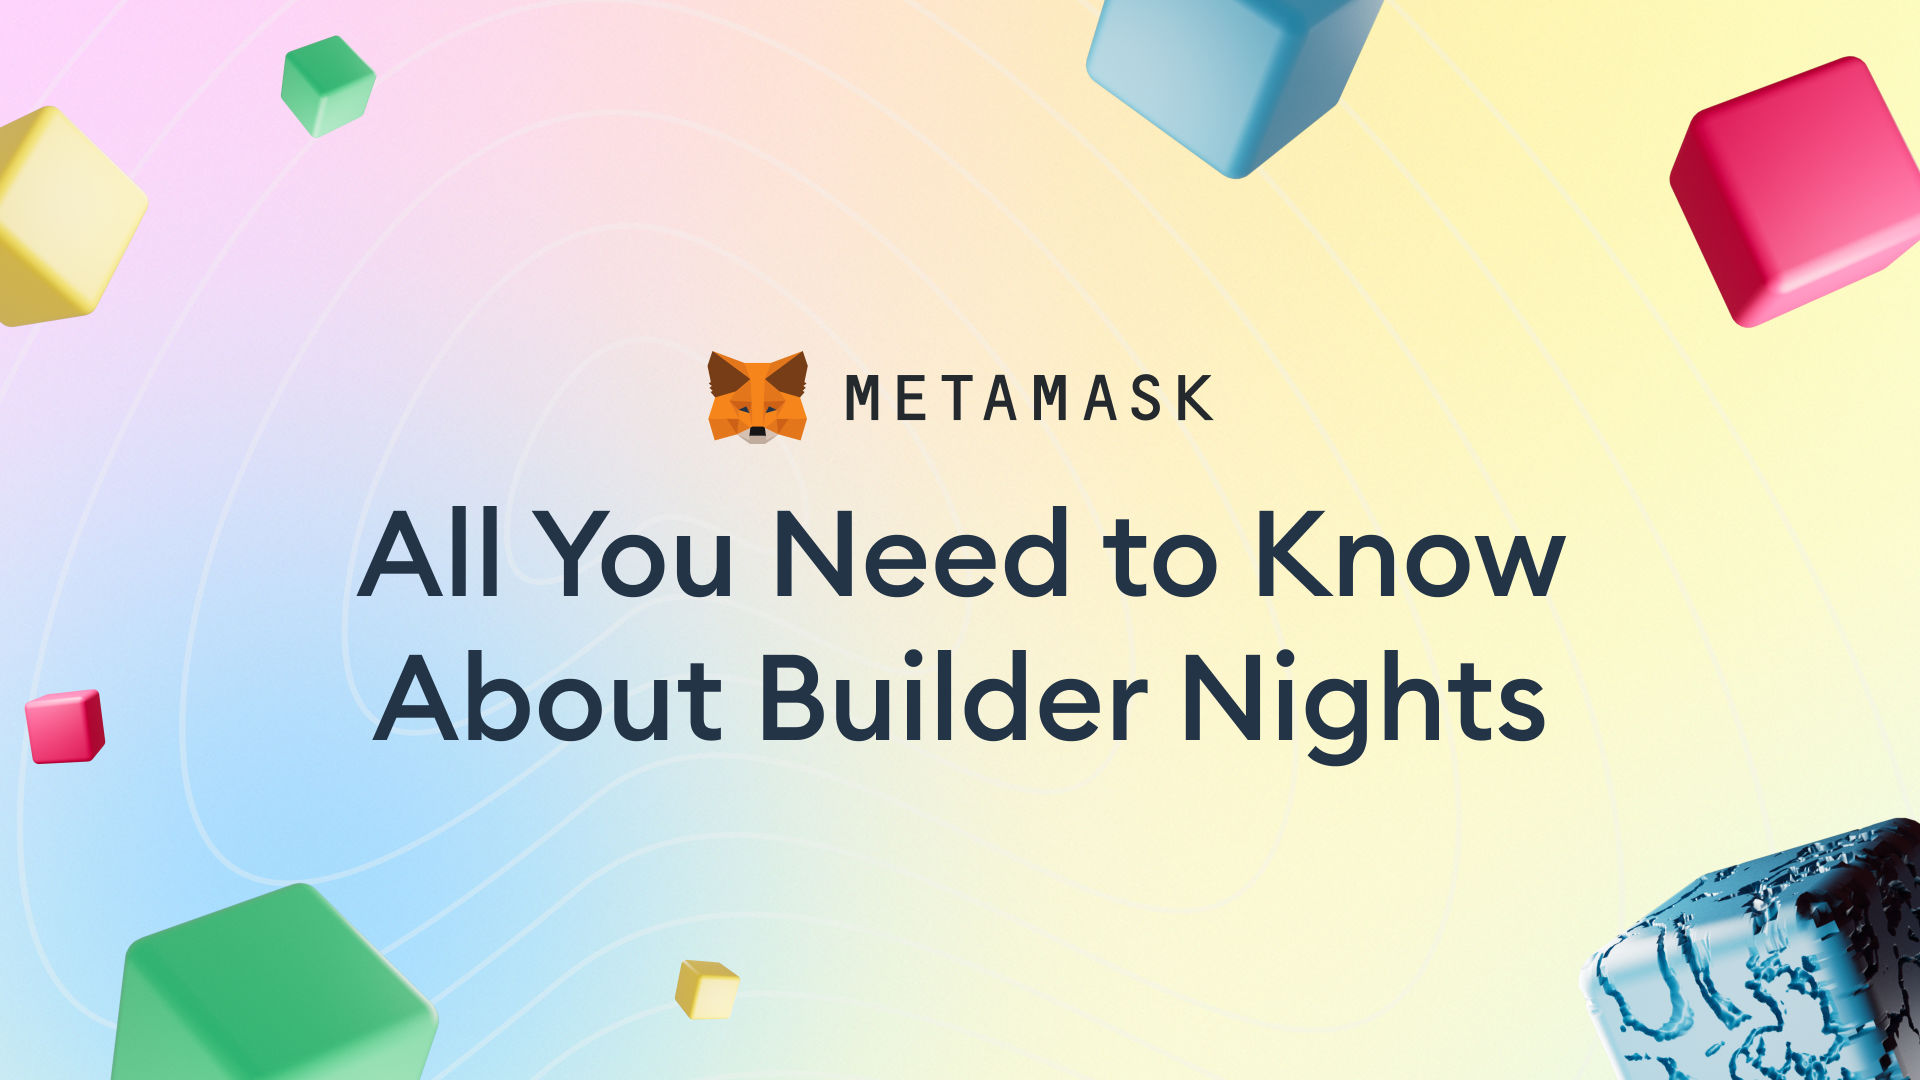 Builder nights feature image